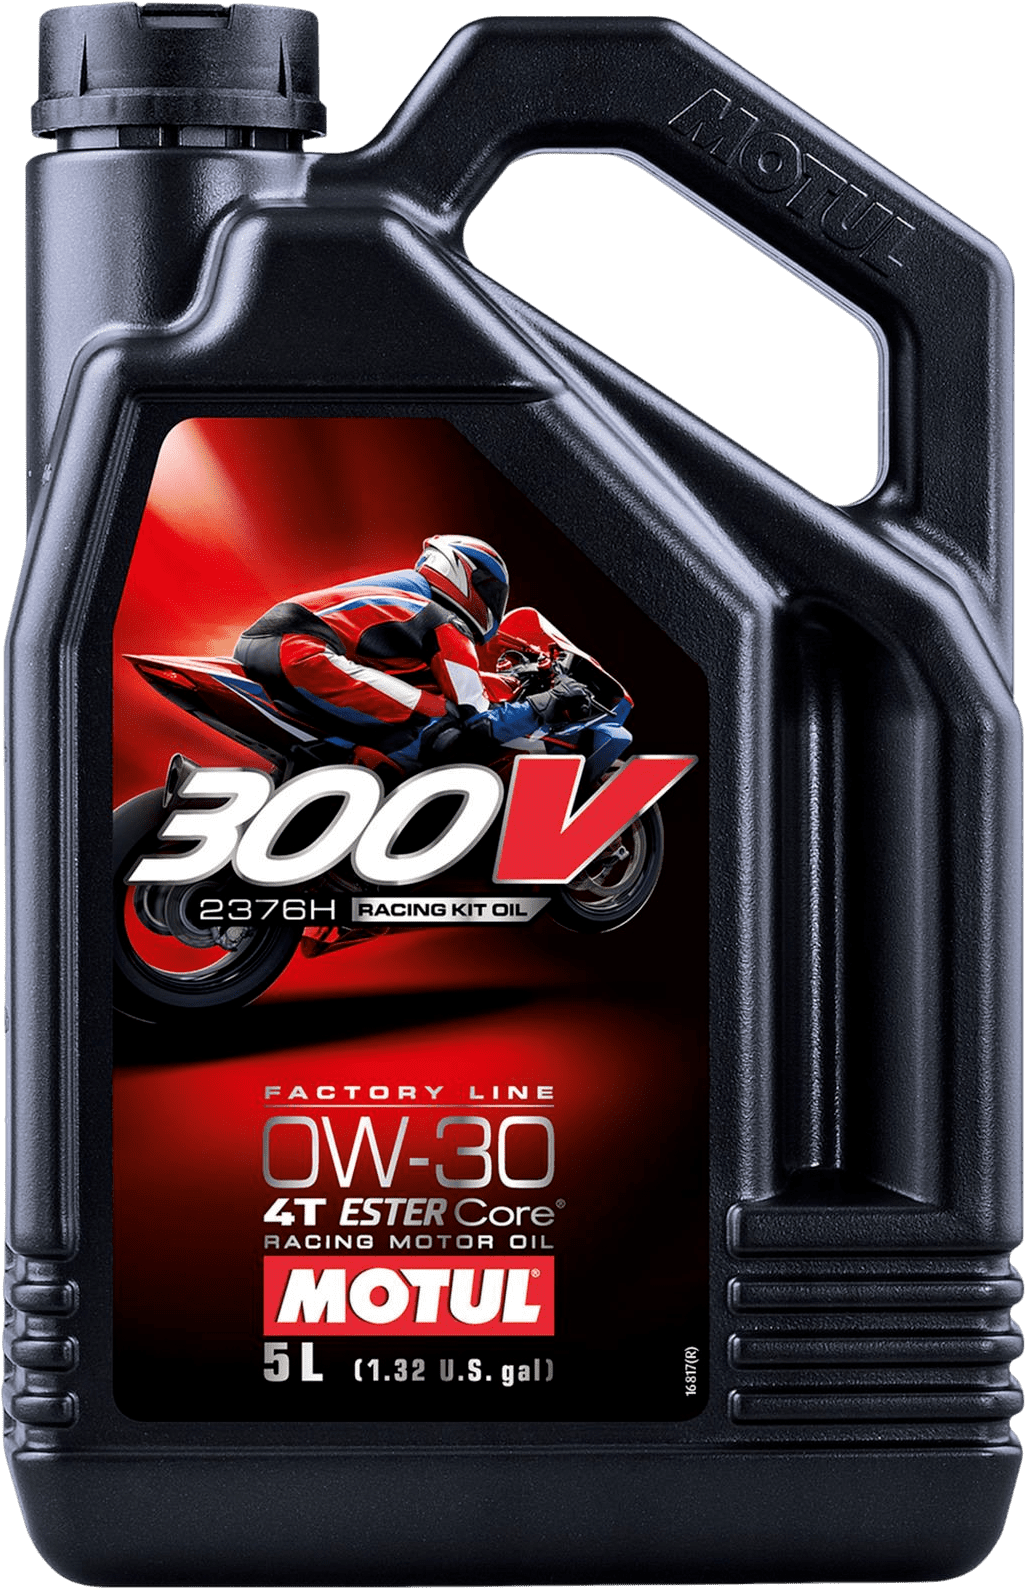 110329-5 Factory Line engine lubricant for racing application specifically developed with HONDA for the Honda CBR 1000 RR-R fitted with HRC KIT (Honda Racing Corporation).